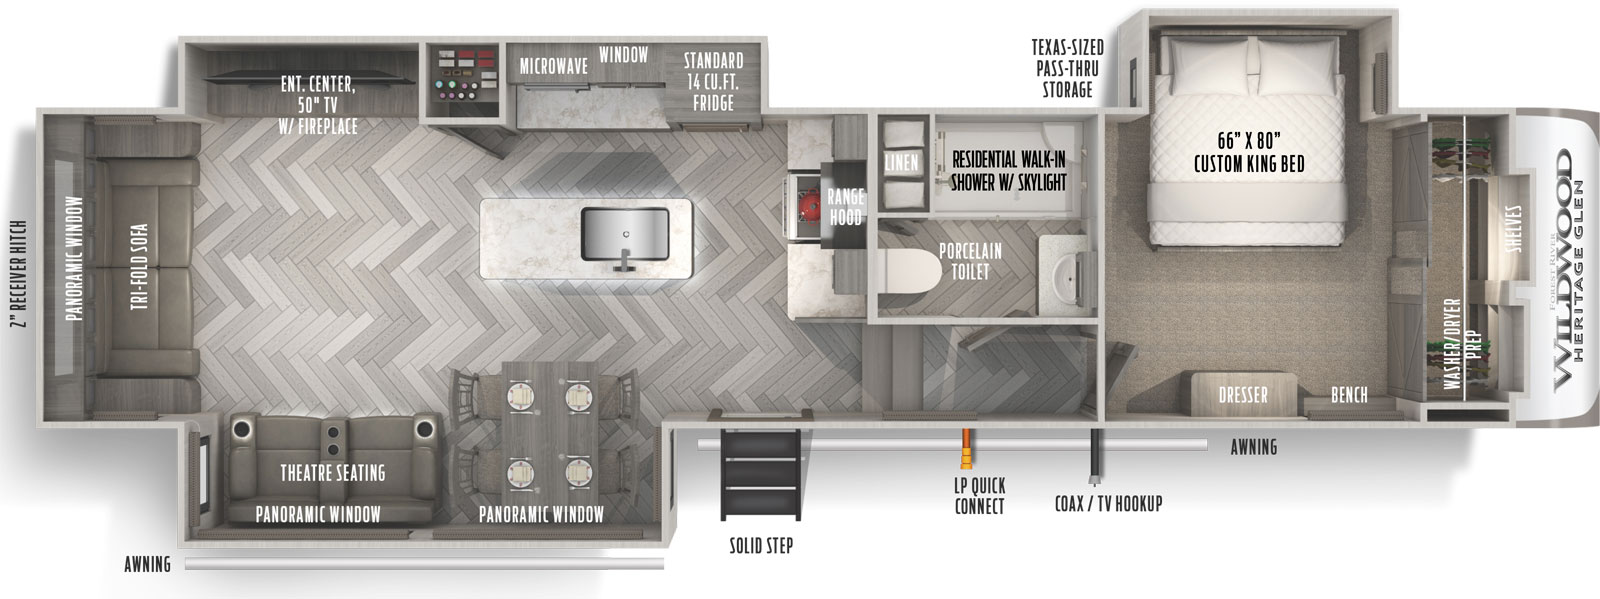 Heritage Glen 338BAR floorplan. The 338BAR has 3 slide outs and one entry door.